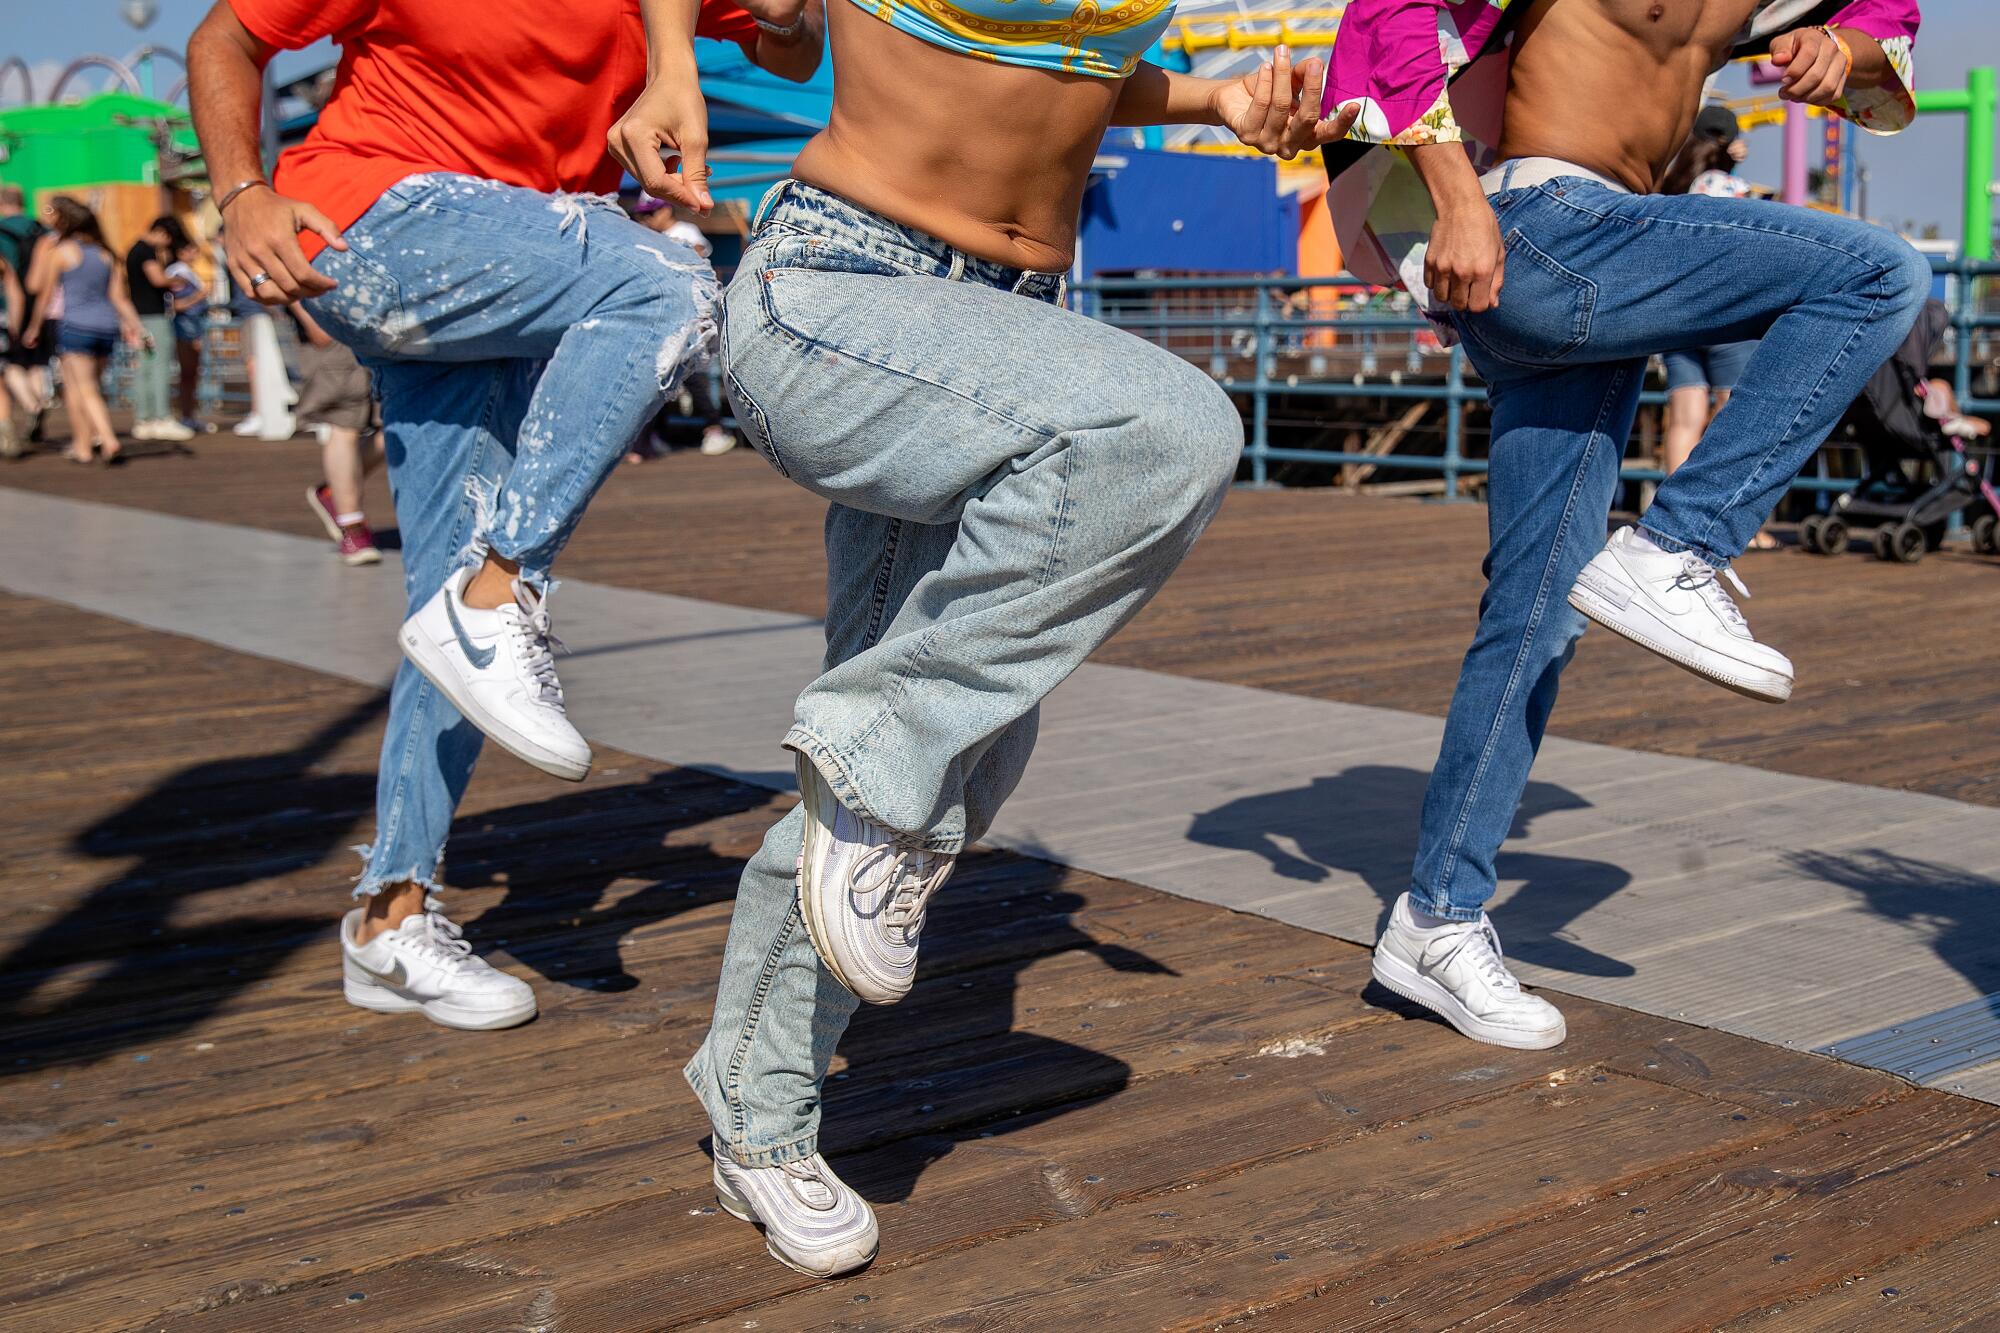 A detail image of three pairs of legs dancing on a pier.